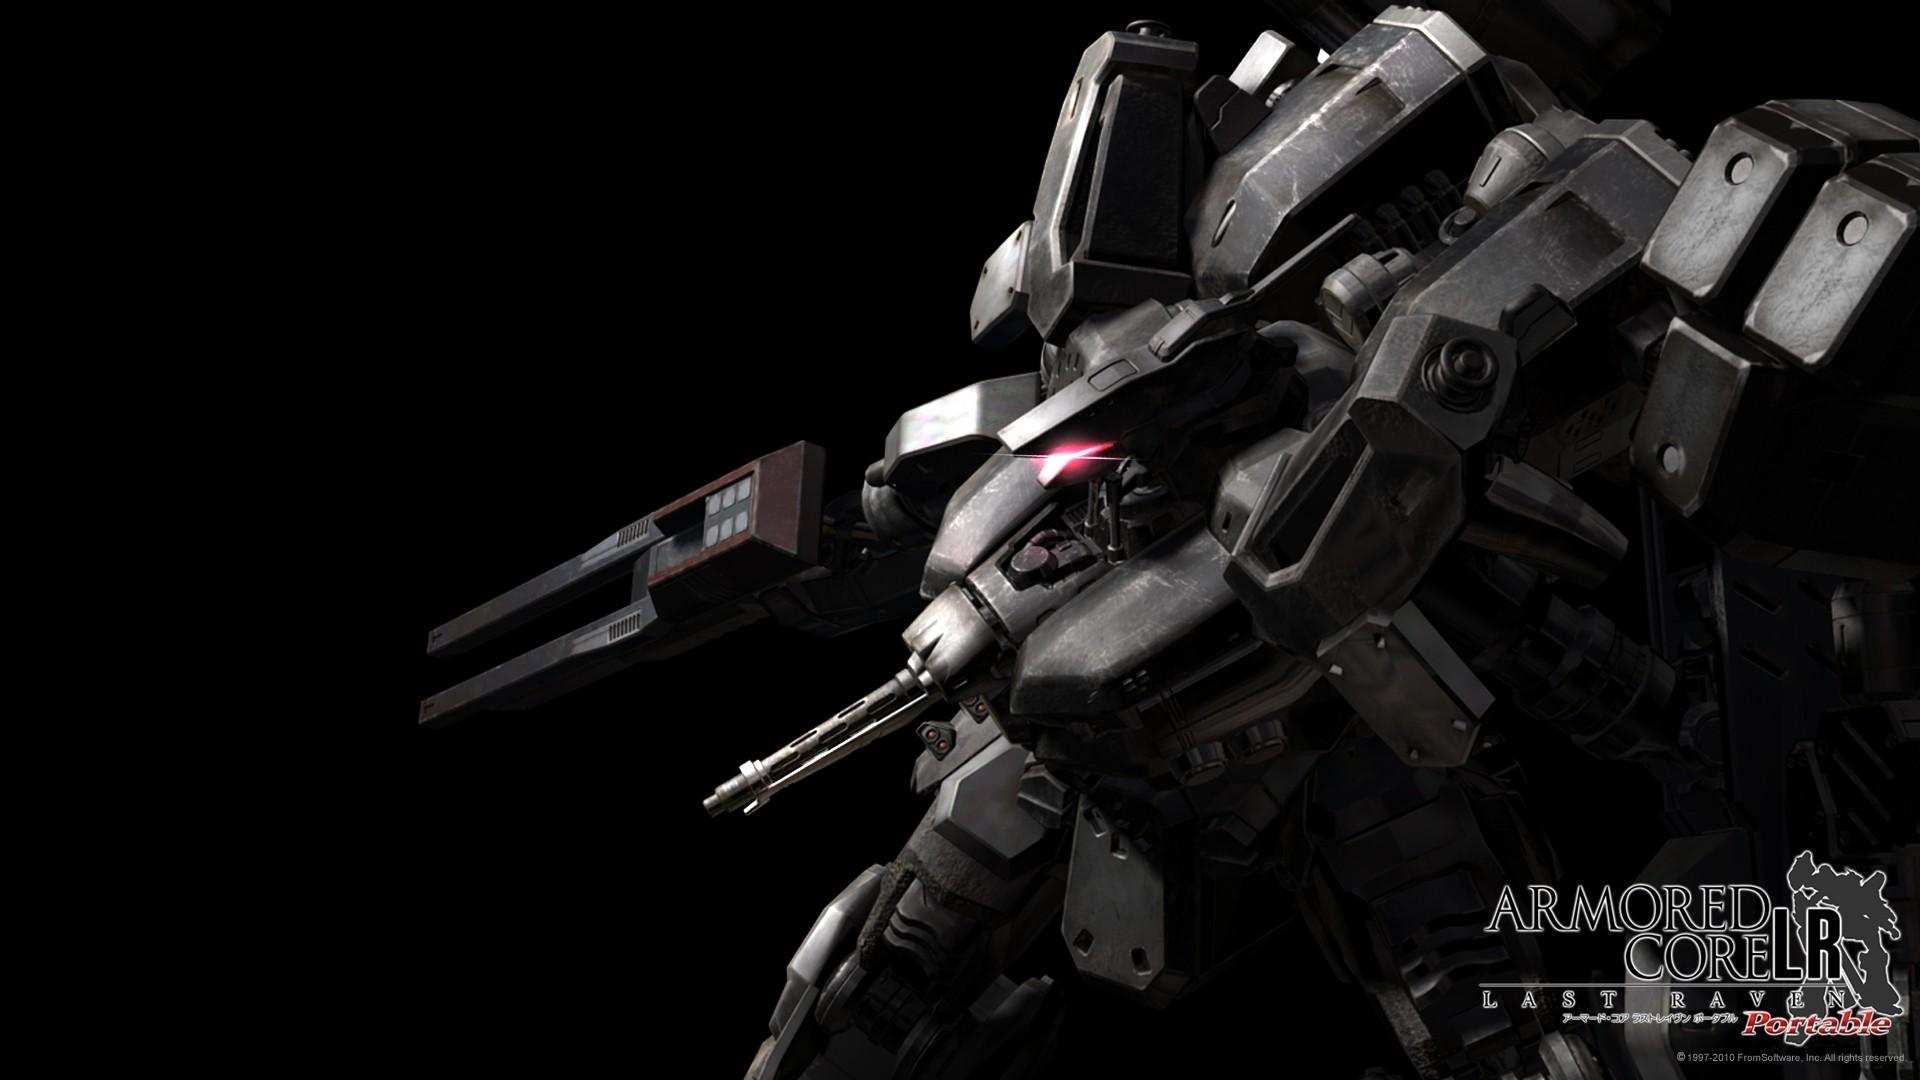 Wallpaper : Armored Core, Armored Core VI, video games, Video Game Art,  space, planet 3840x2160 - CptLande - 2203765 - HD Wallpapers - WallHere